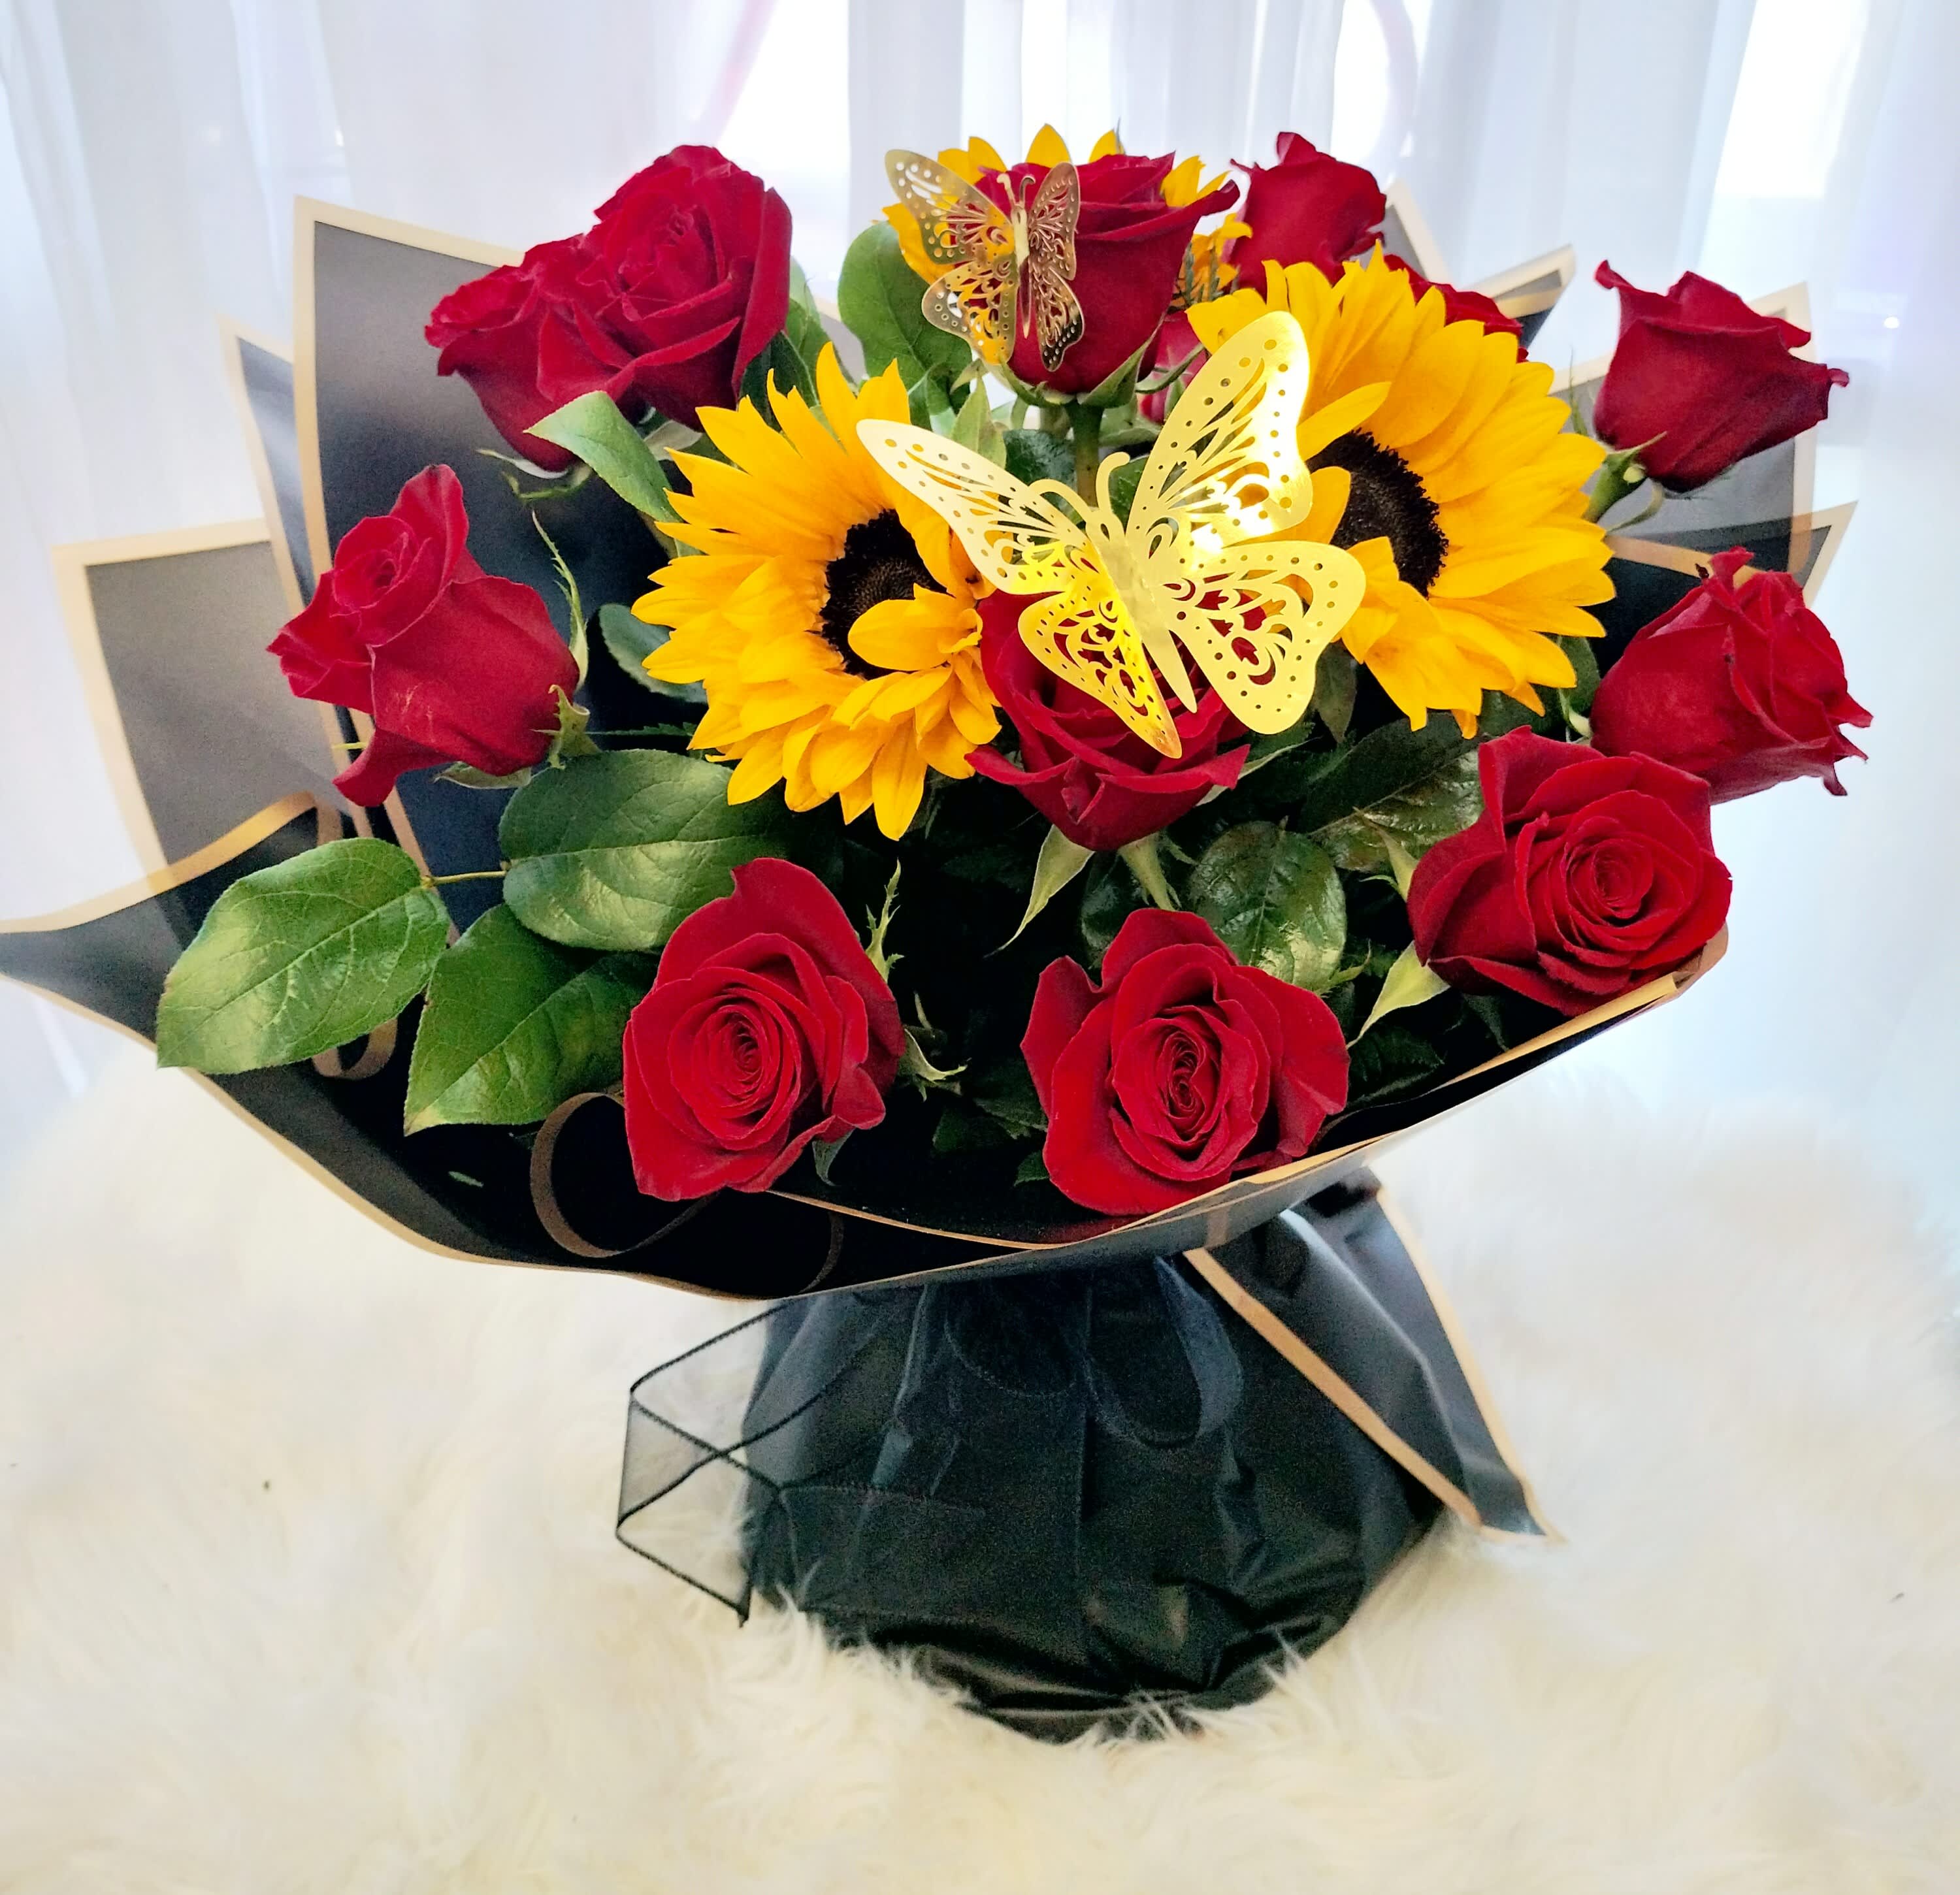 Vibrant Love Bouquet - Sunflowers and Red dozen roses.